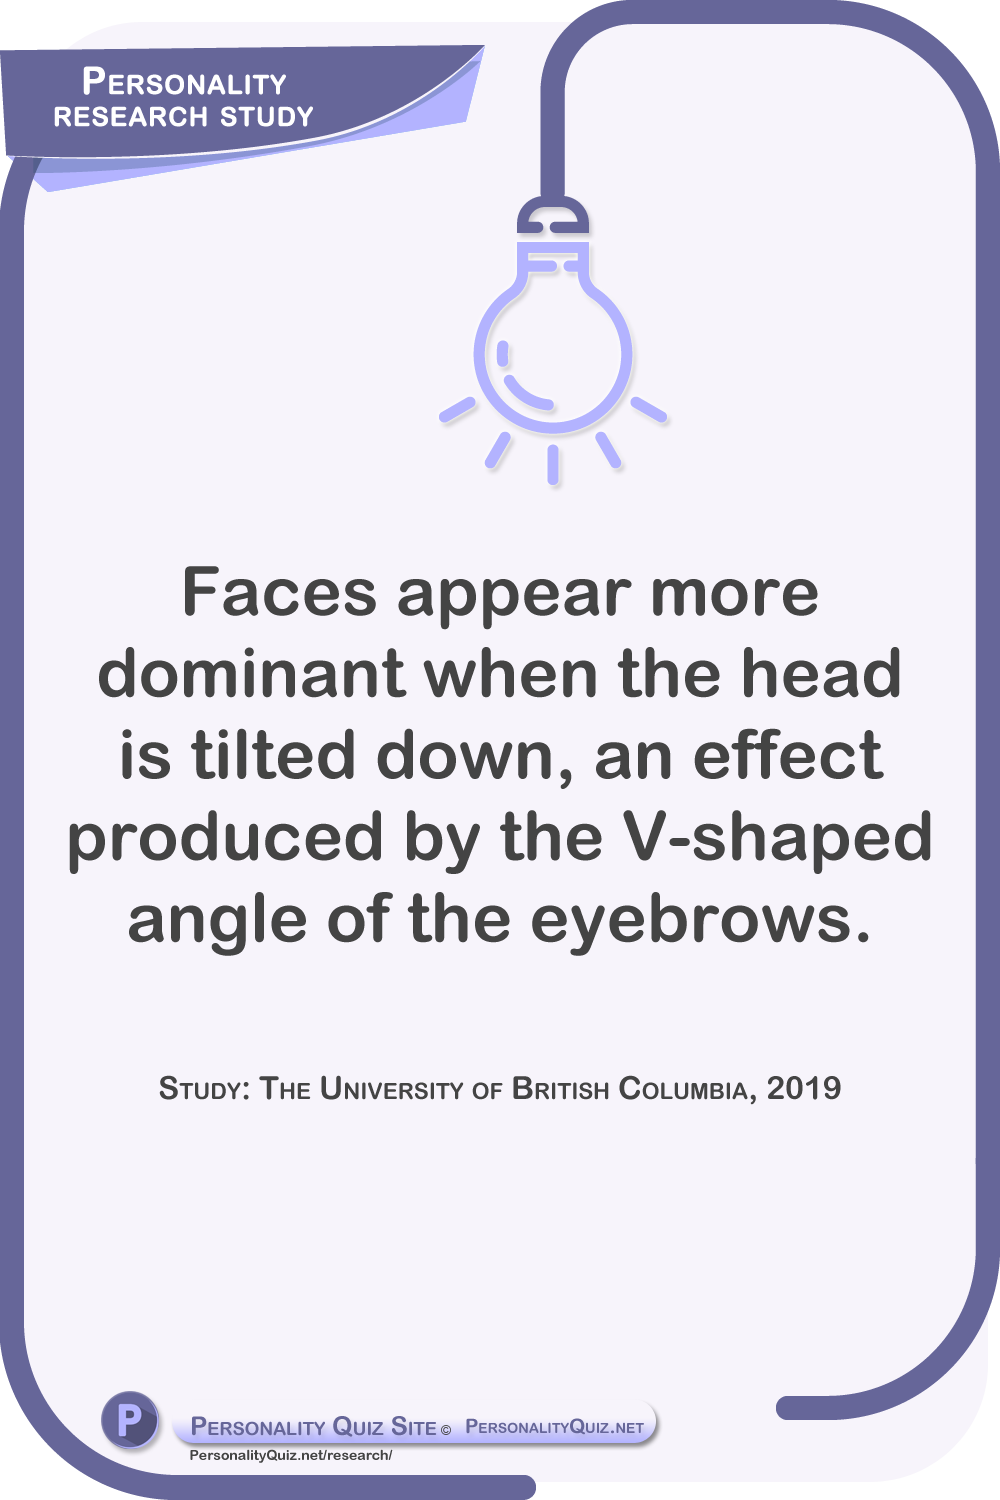 Faces appear more dominant when the head is tilted down, an effect produced by the V-shaped angle of the eyebrows. Study: The University of British Columbia, 2019